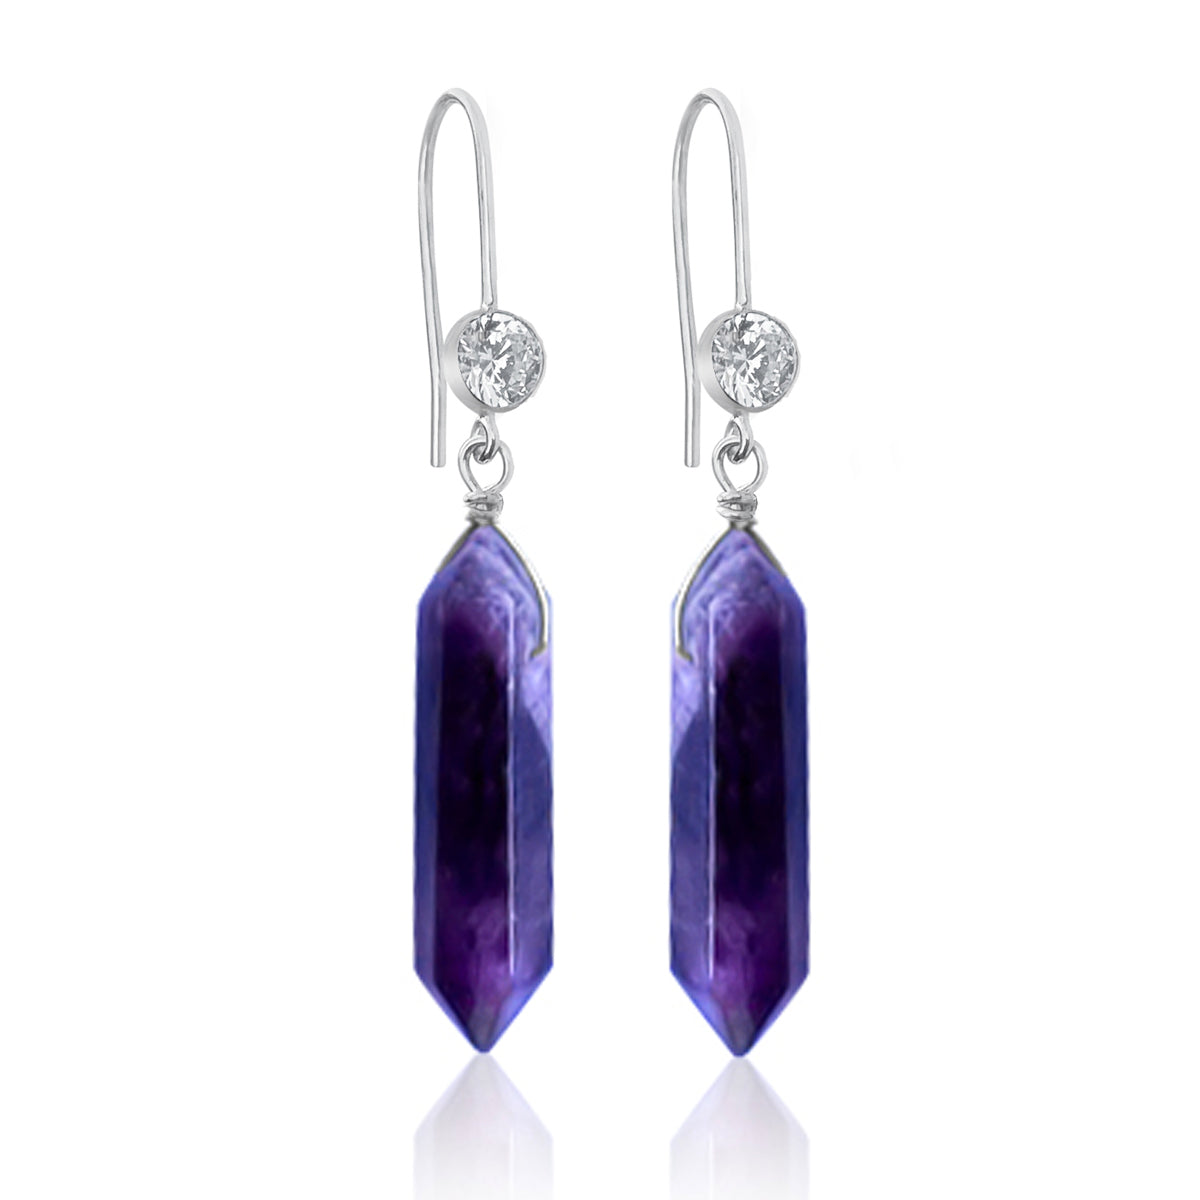 The Transformation Talisman Amethyst Earrings are a stunning pair of earrings that are perfect for those seeking to connect with their inner selves and embrace positive transformation.